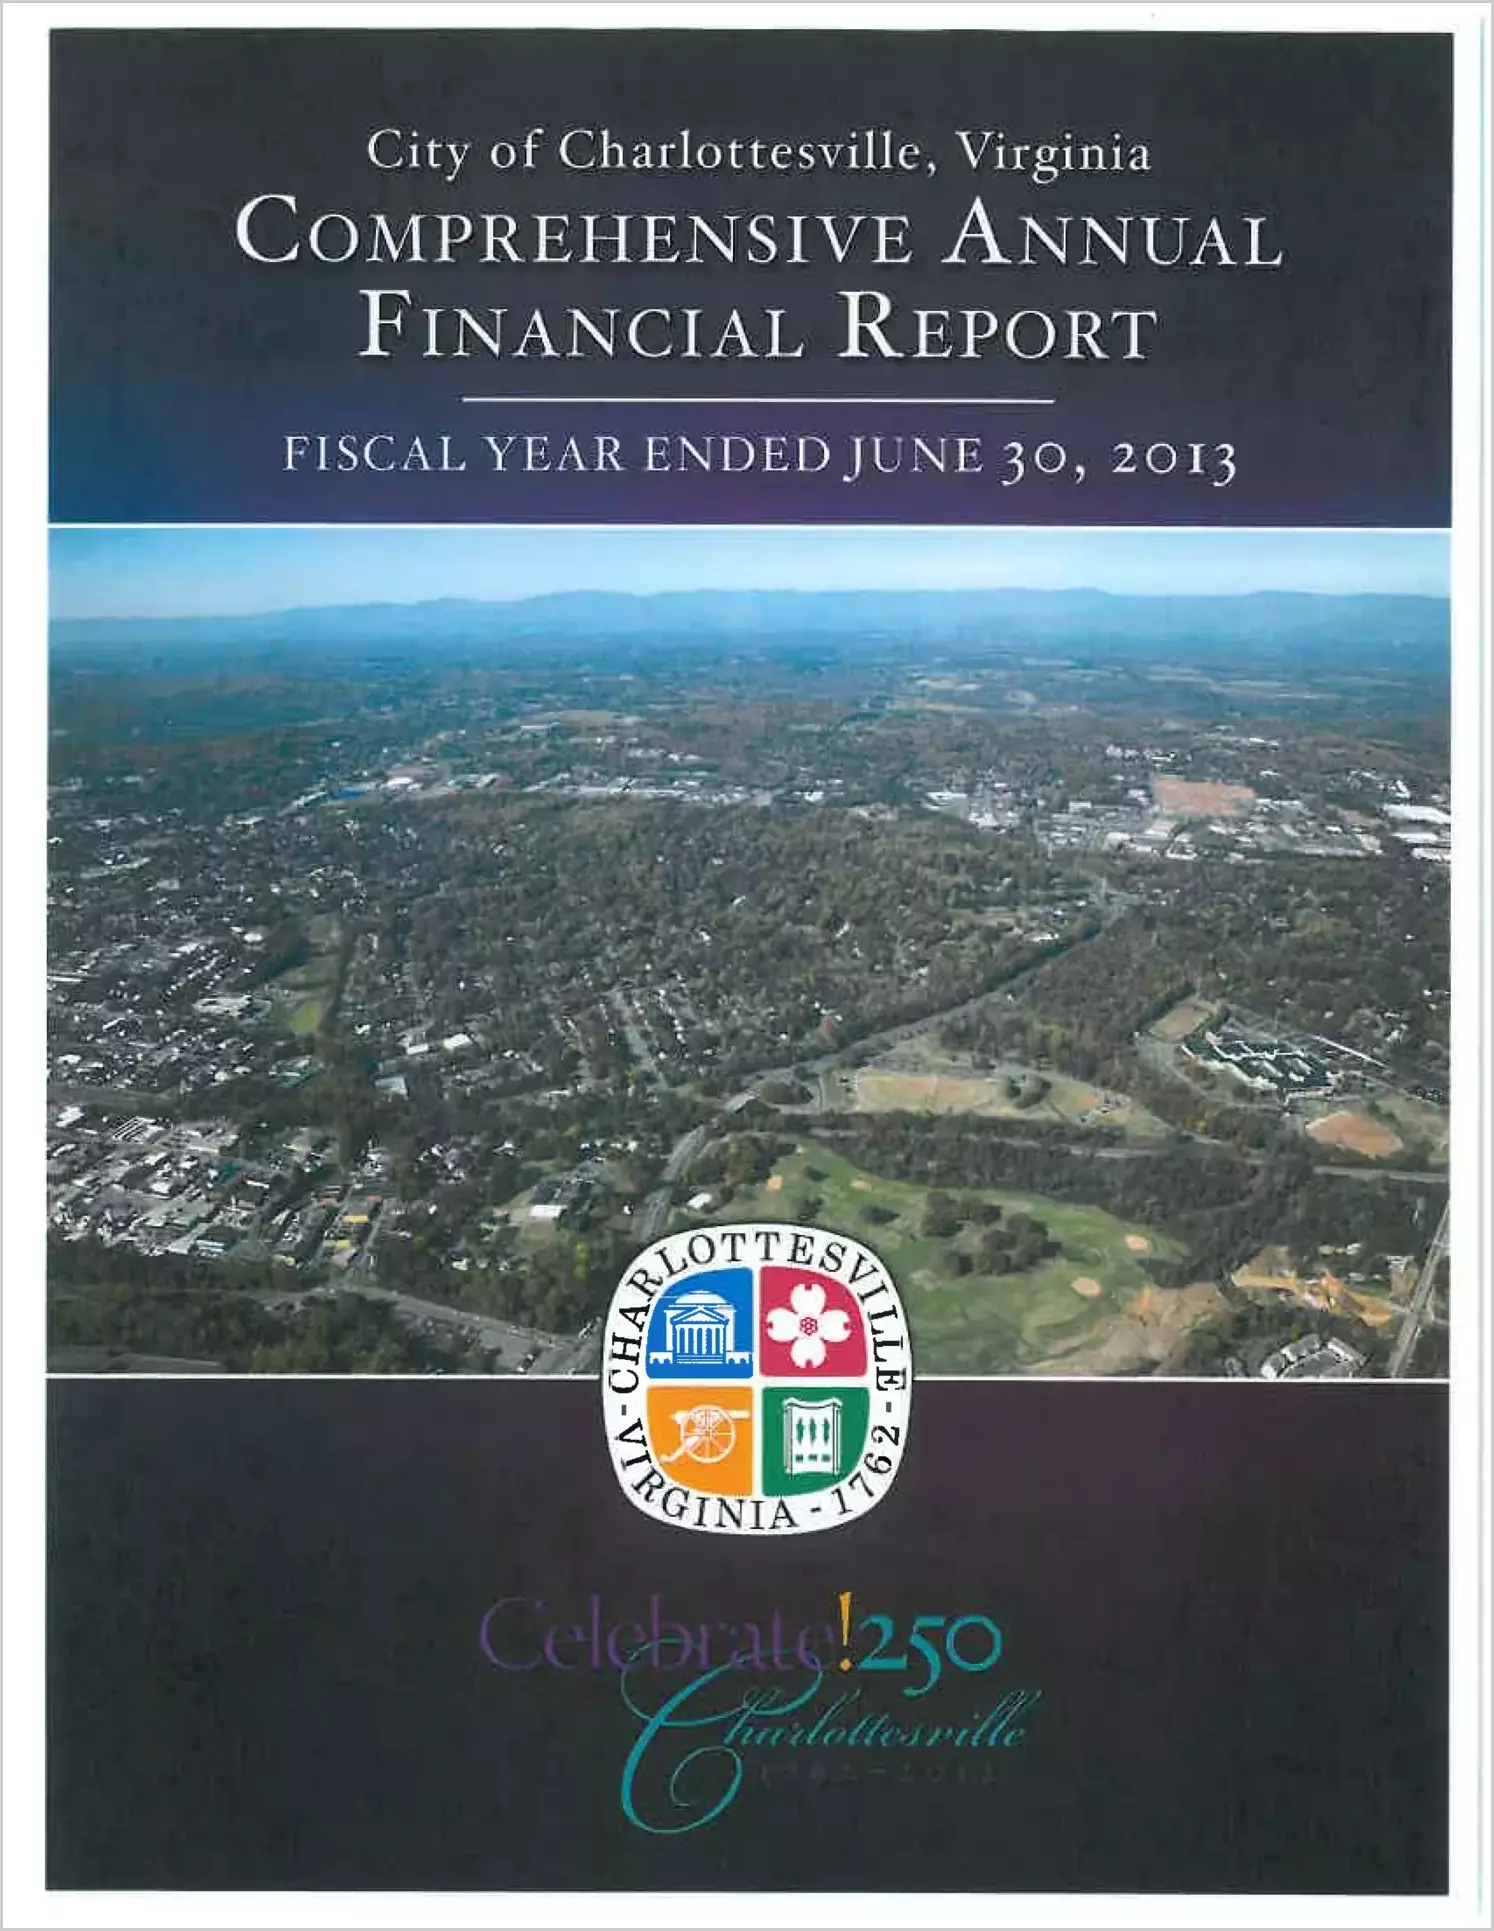 2013 Annual Financial Report for City of Charlottesville